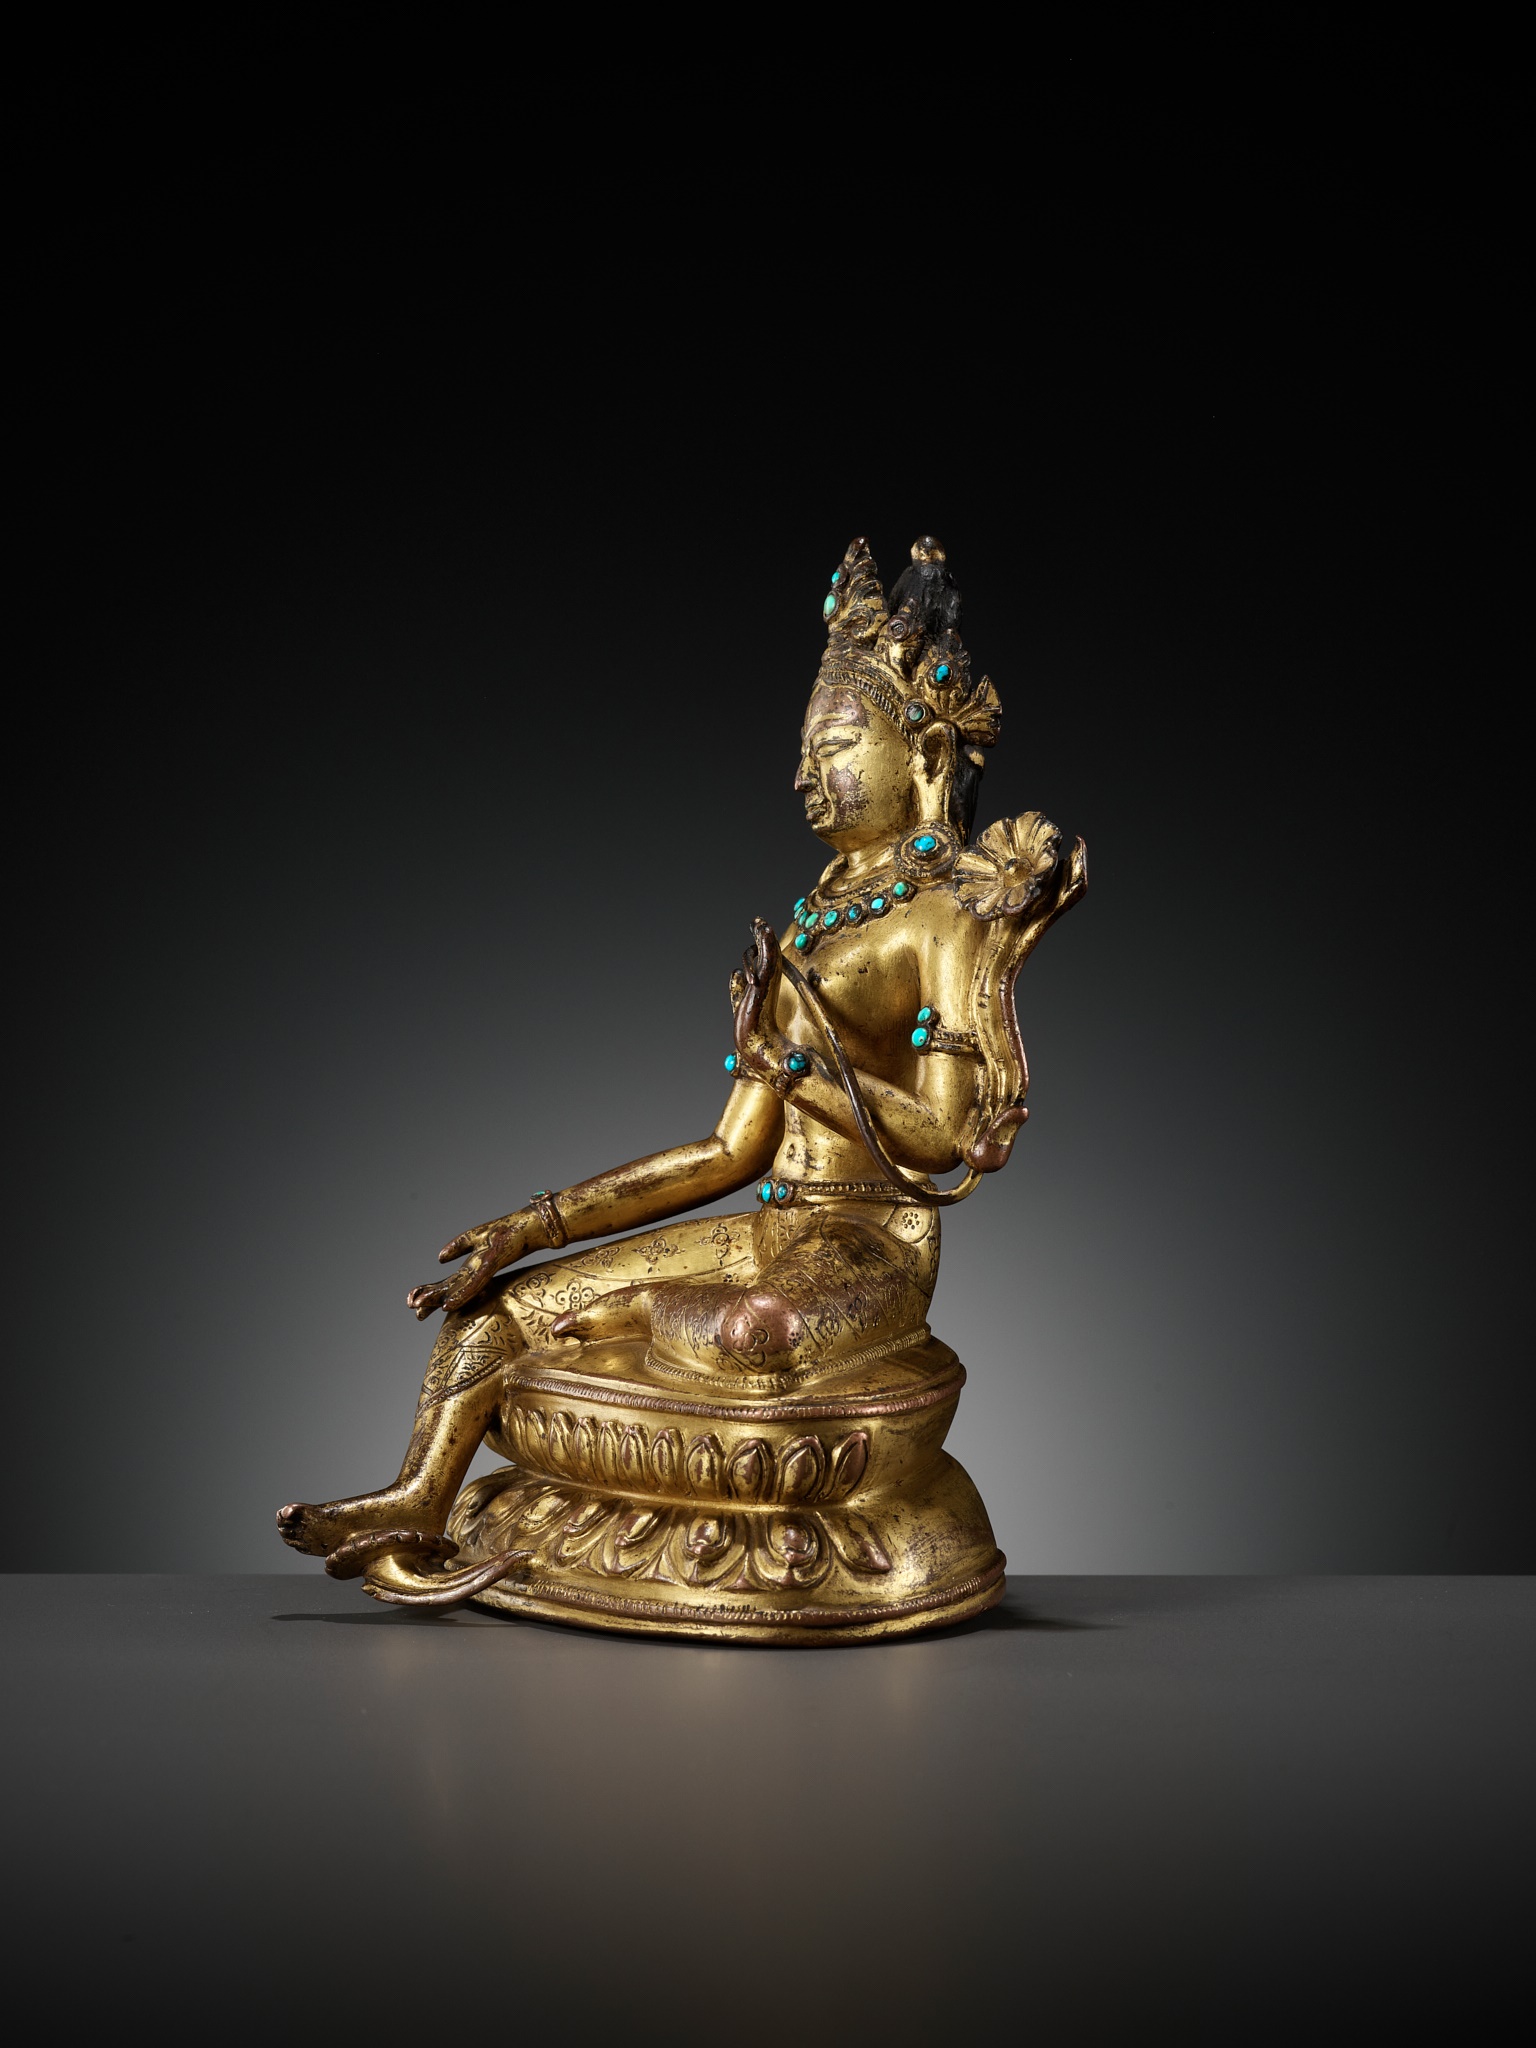 A GILT AND TURQUOISE-INLAID COPPER ALLOY FIGURE OF GREEN TARA, DENSATIL STYLE, TIBET, 14TH CENTURY - Image 10 of 16